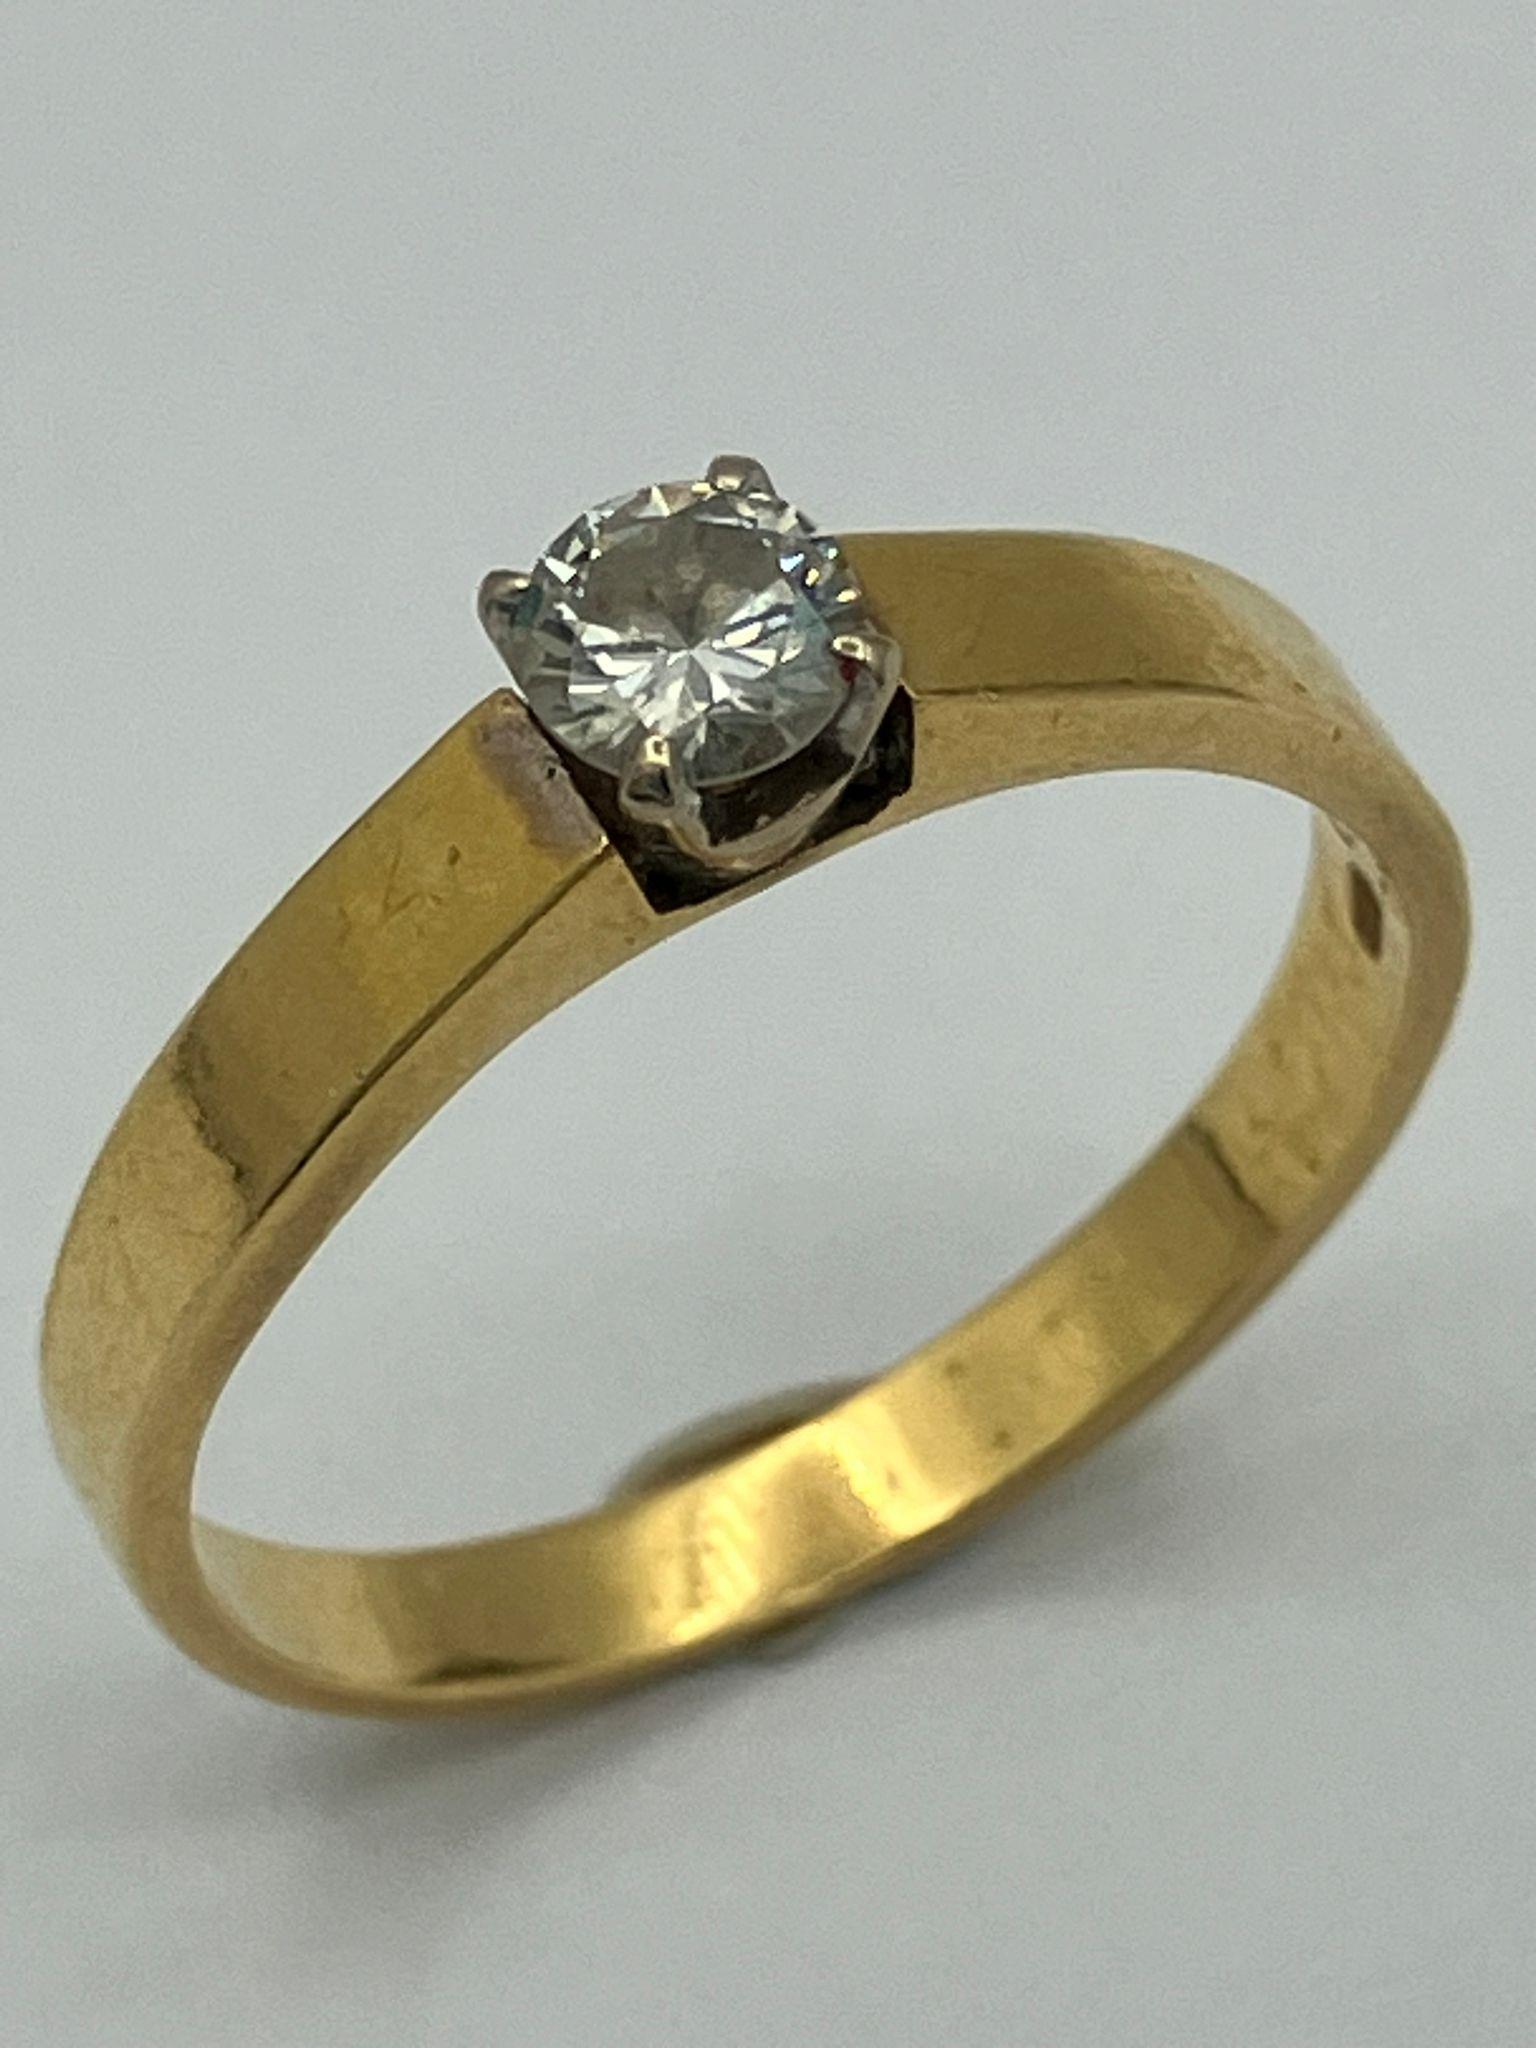 18 carat GOLD and DIAMOND SOLITAIRE RING.Having a Quarter Carat clear white DIAMOND SOLITAIRE set to